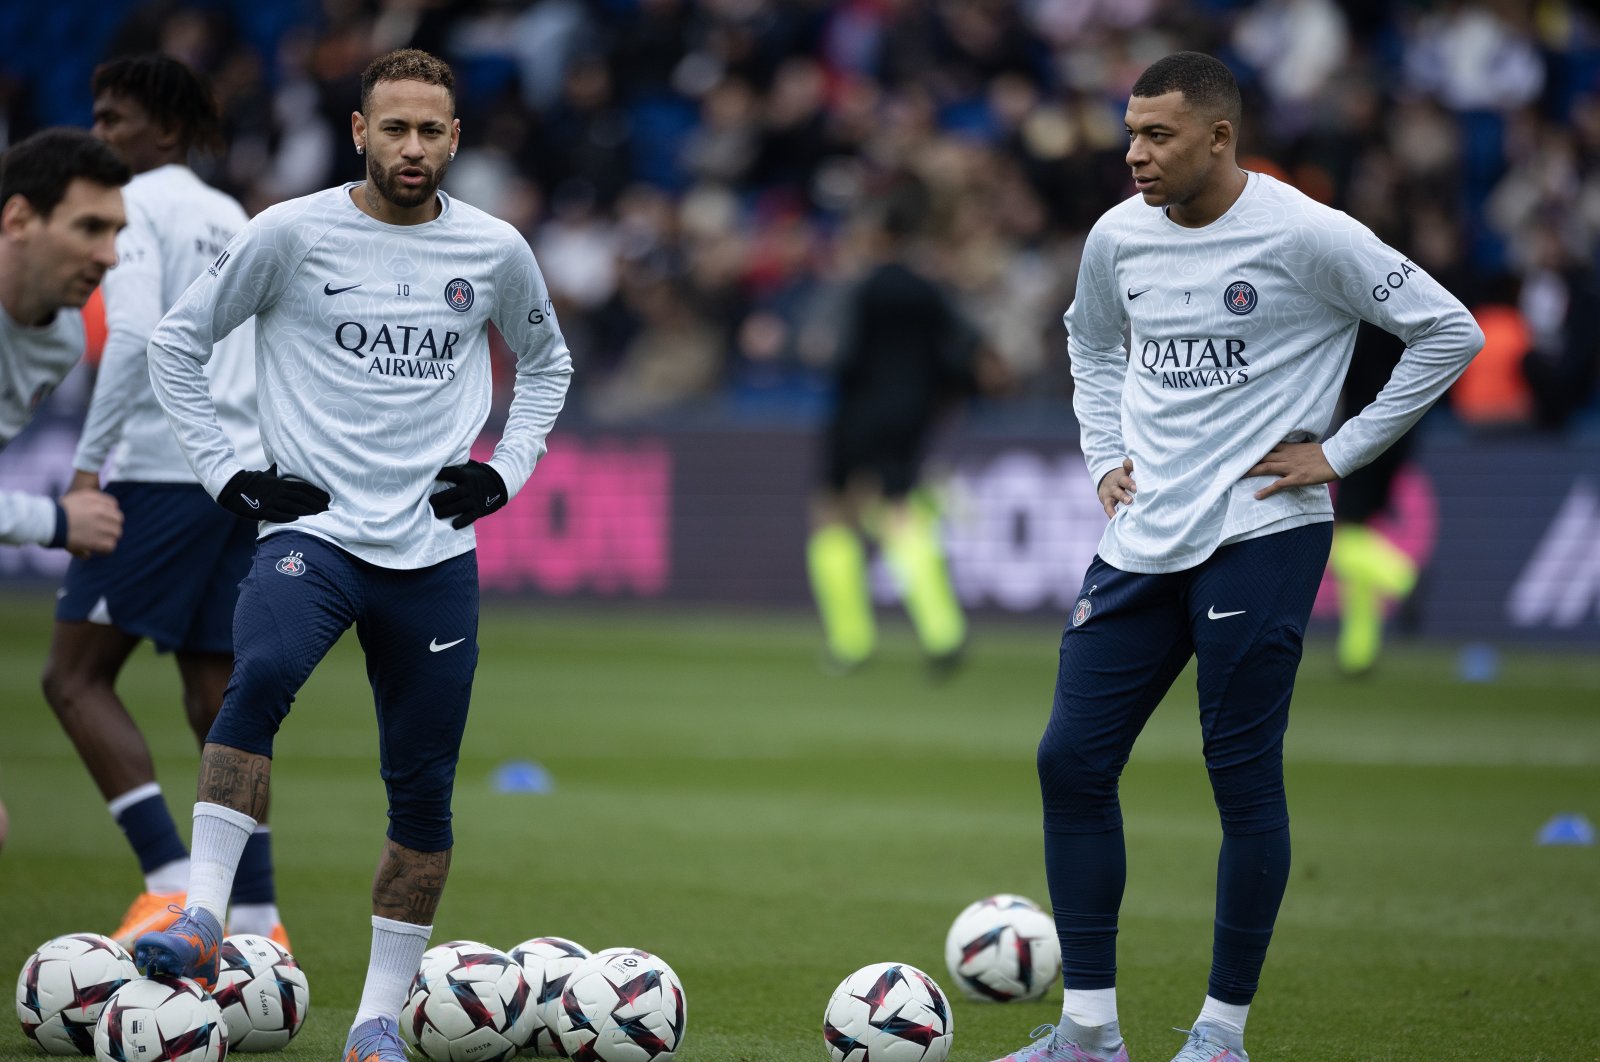 PSG&#039;s Neymar (L) and Kylian Mbappe watch Lionel Messi practice free kicks from the edge of the penalty area during the team&#039;s pre-match warm-up before the Lille match, at Parc des Princes, Paris, France, Feb. 19, 2023. (Getty Images Photo)